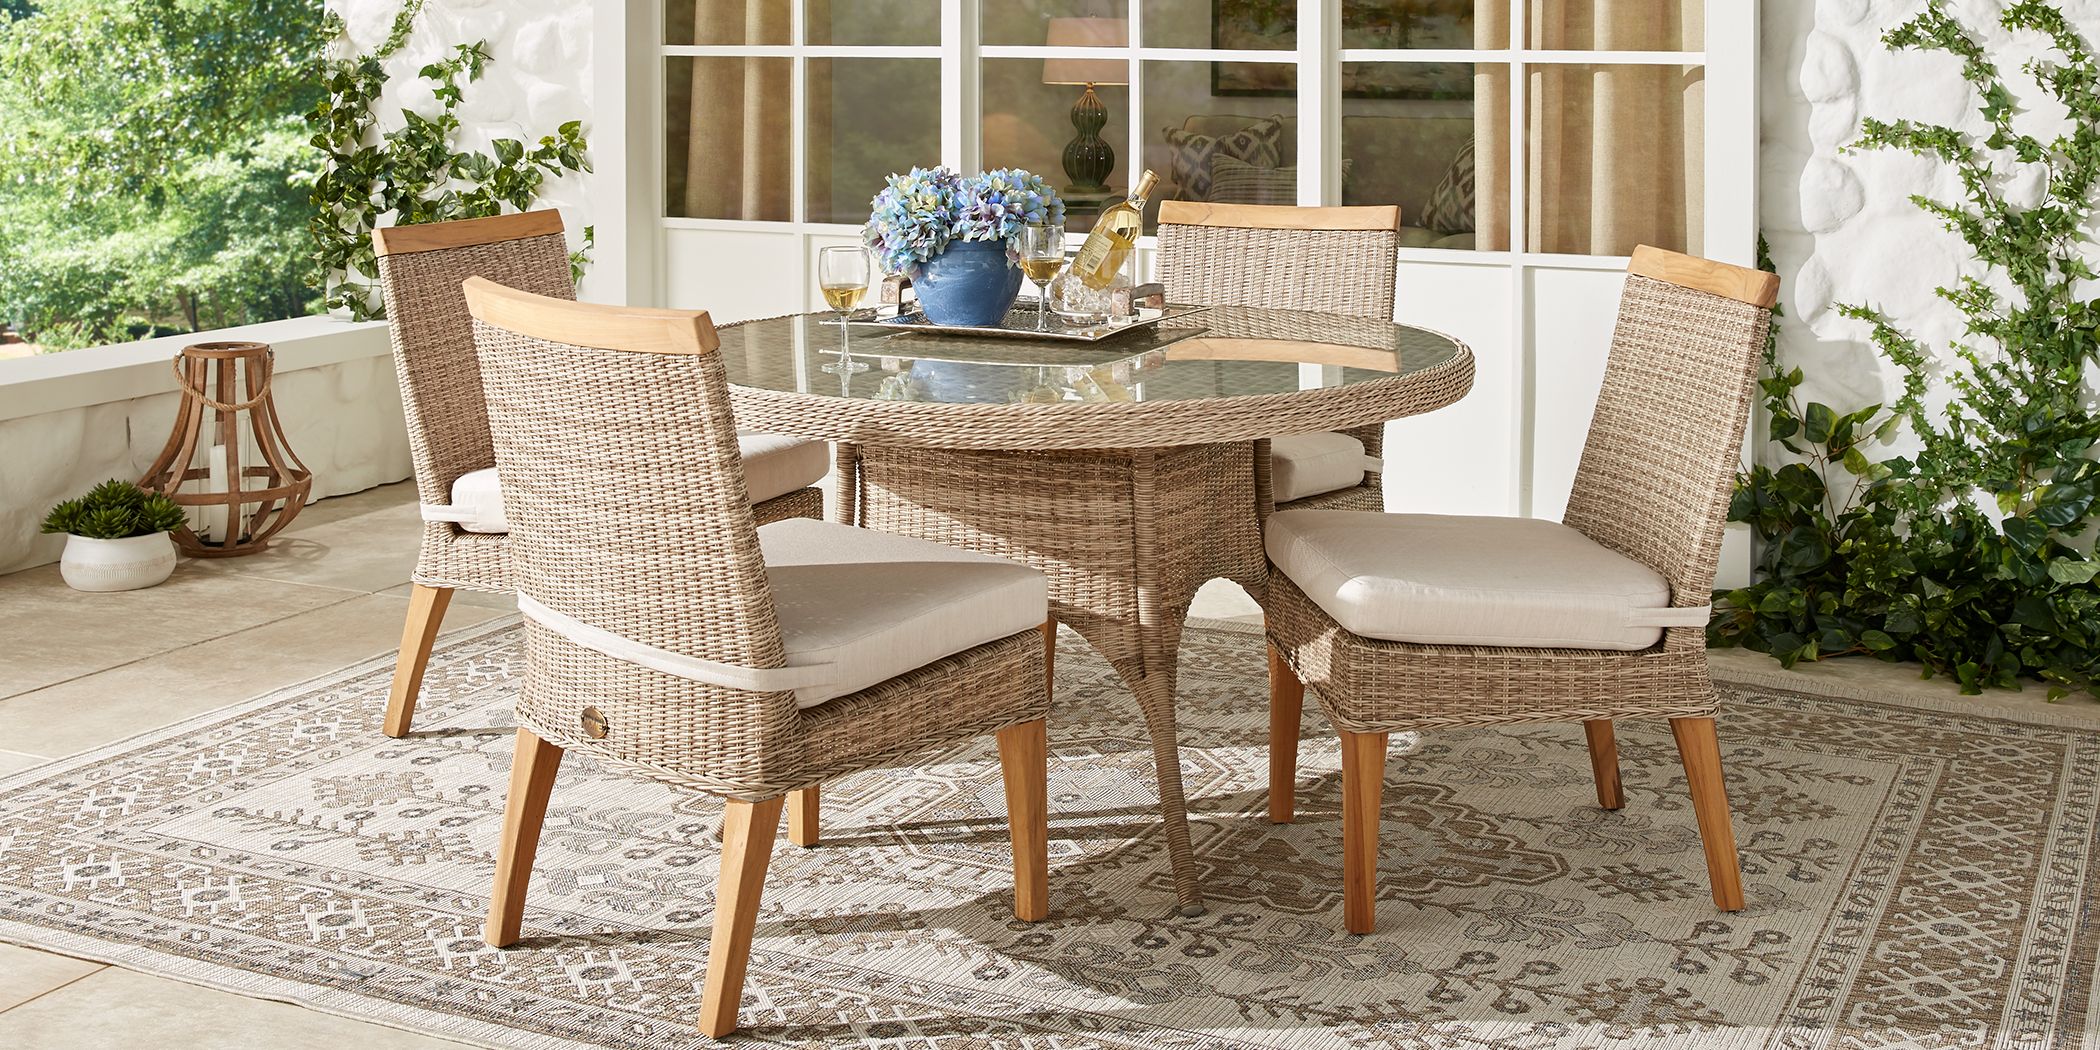 Round Outdoor Patio Dining Sets, Outdoor Round Dining Table Set